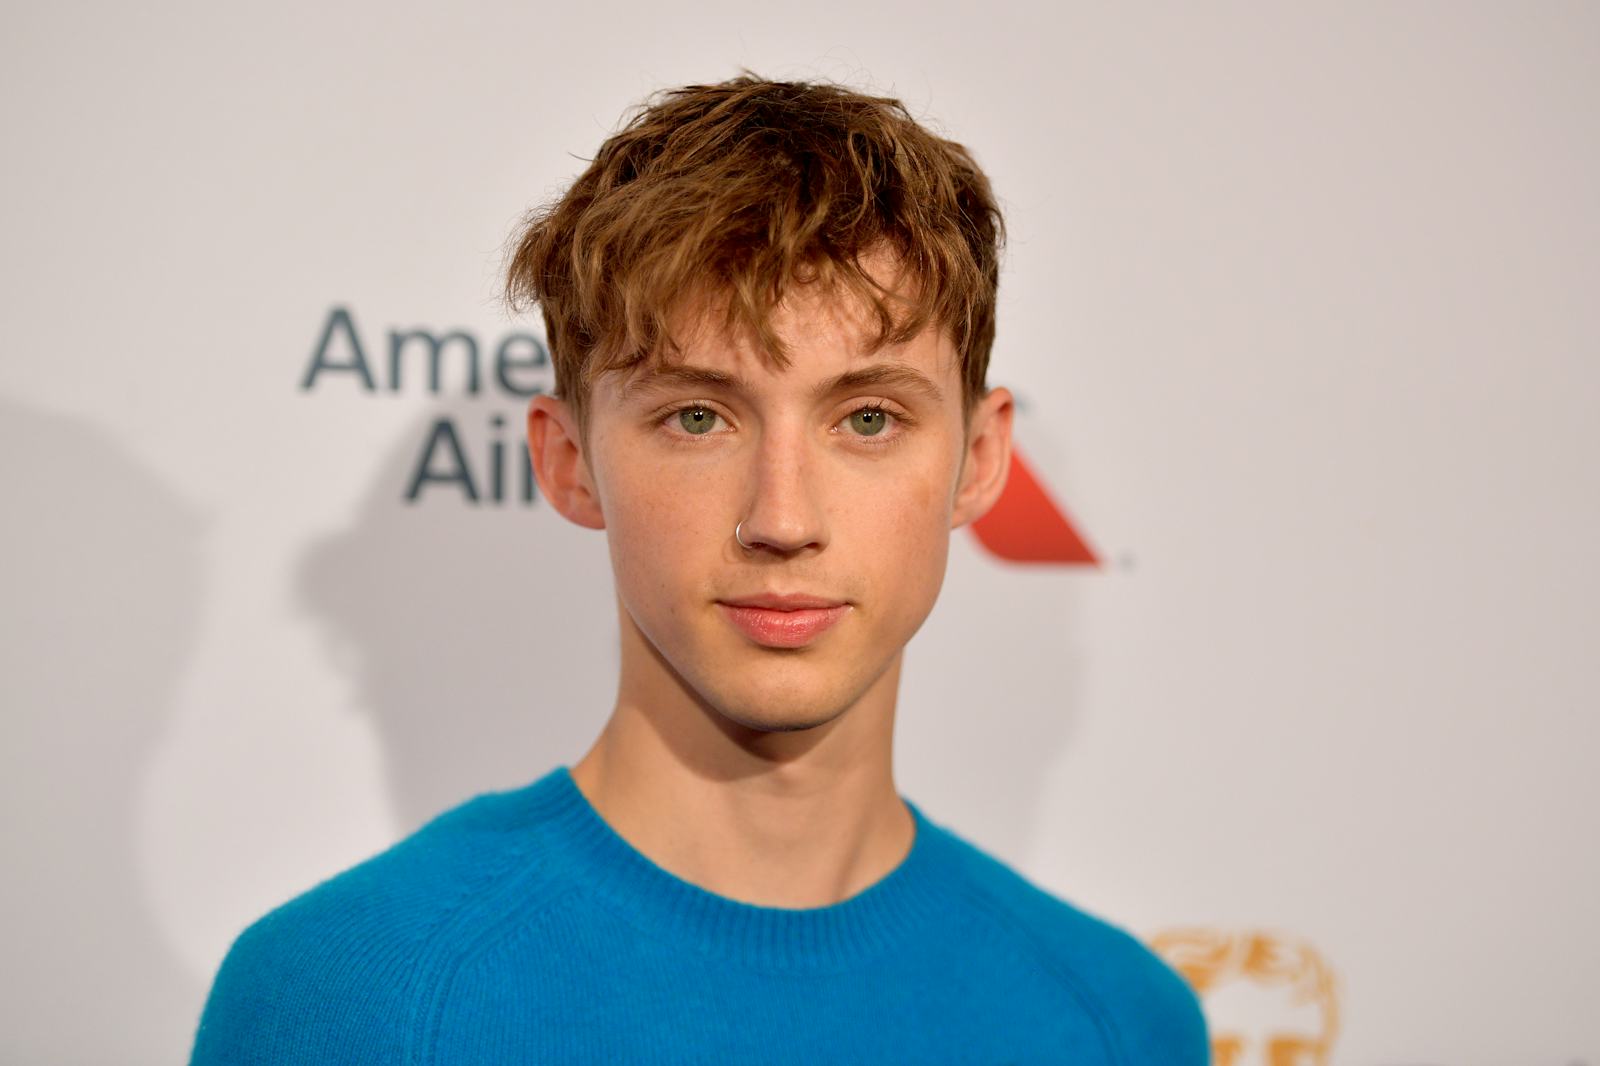 Who Is Troye Sivan Dating? The Singer's Relationship With Model Jacob